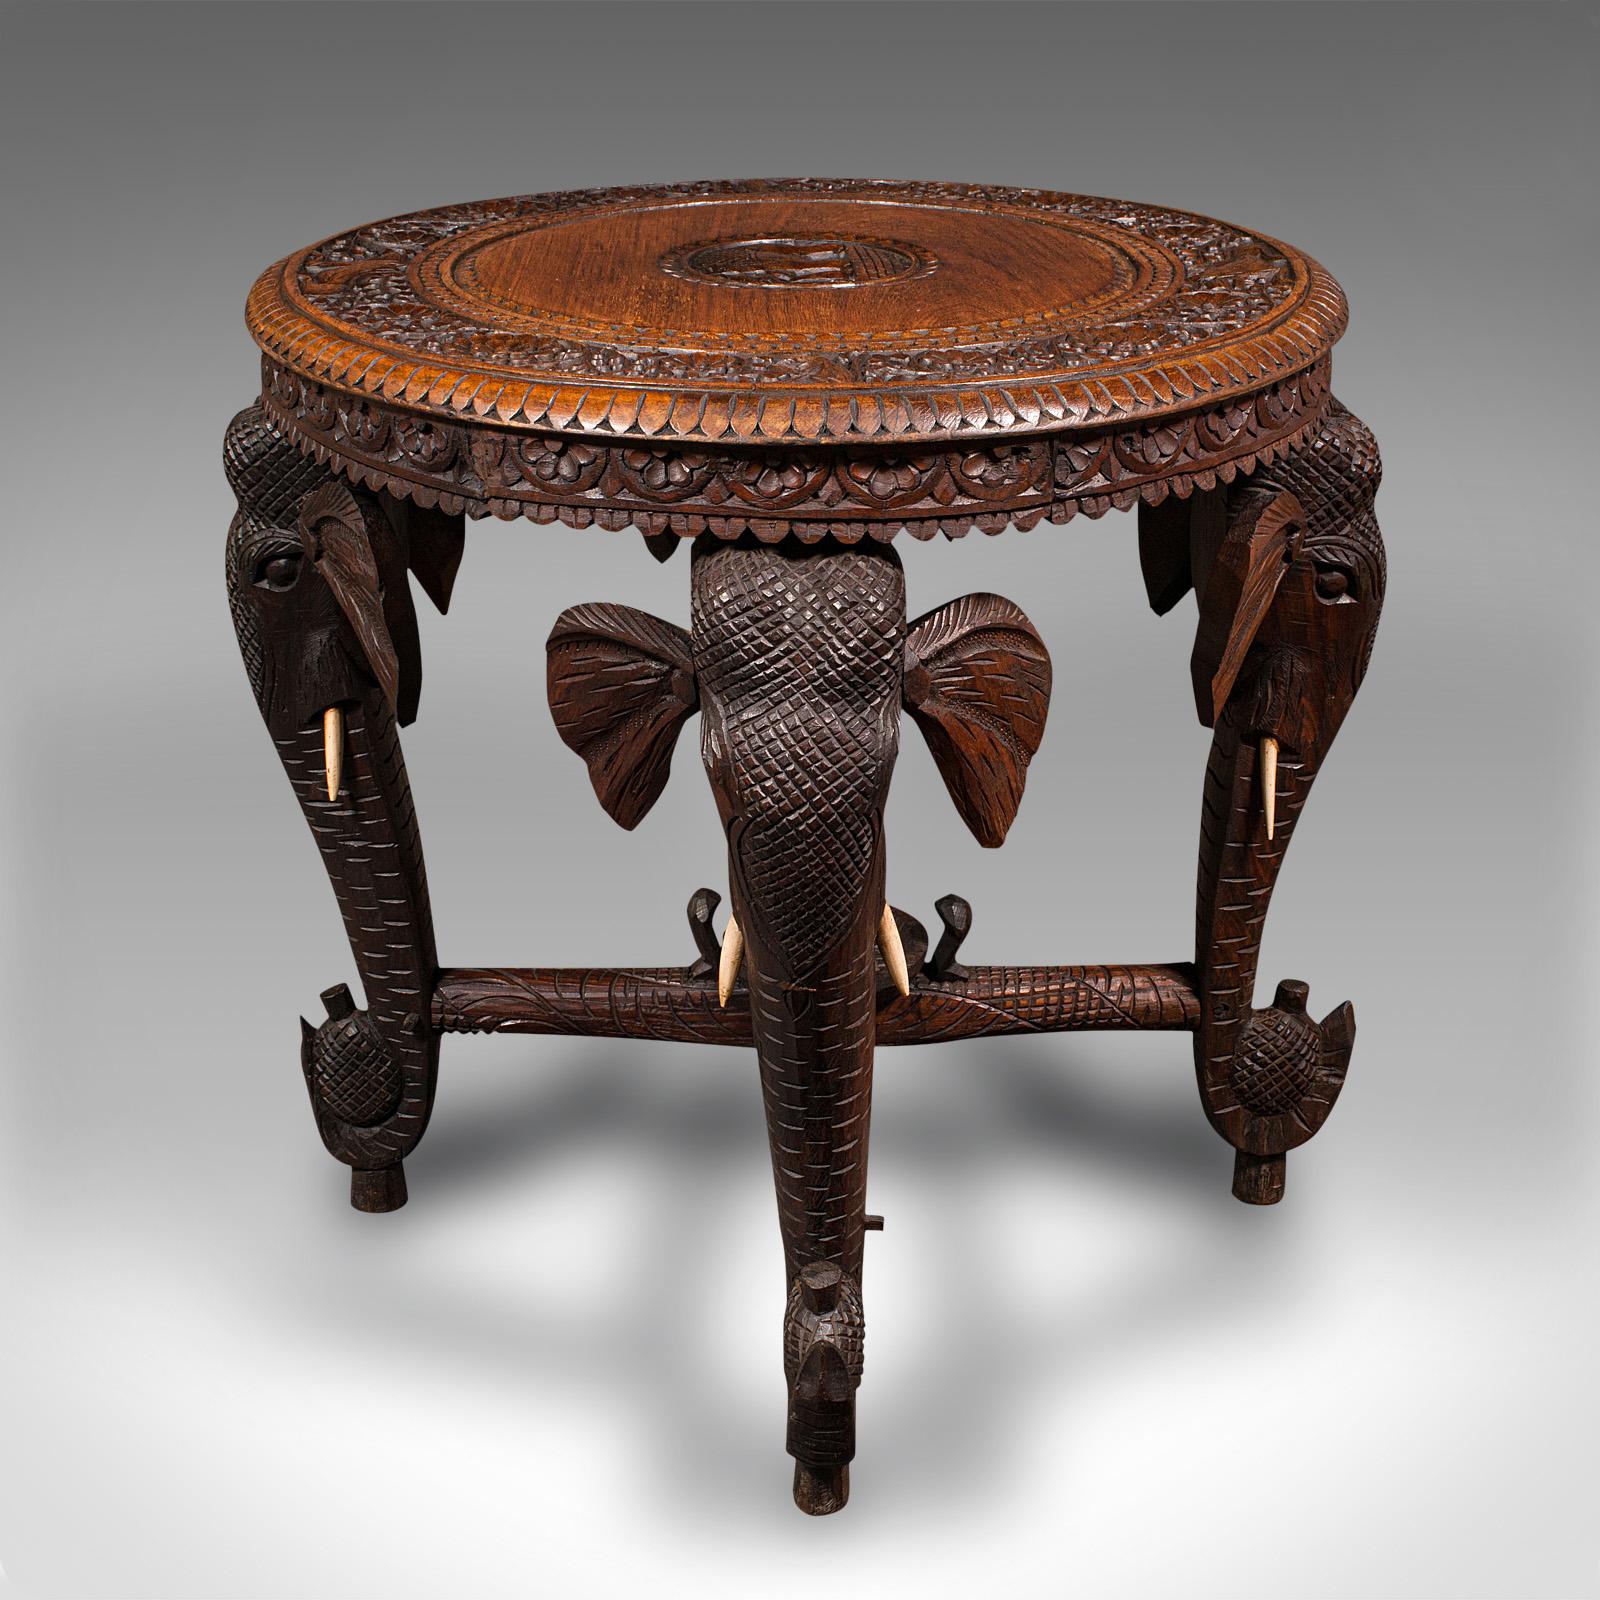 Anglo-Indian Antique Occasional Table, Indian Teak, Carved, Coffee, Elephants, Late Victorian